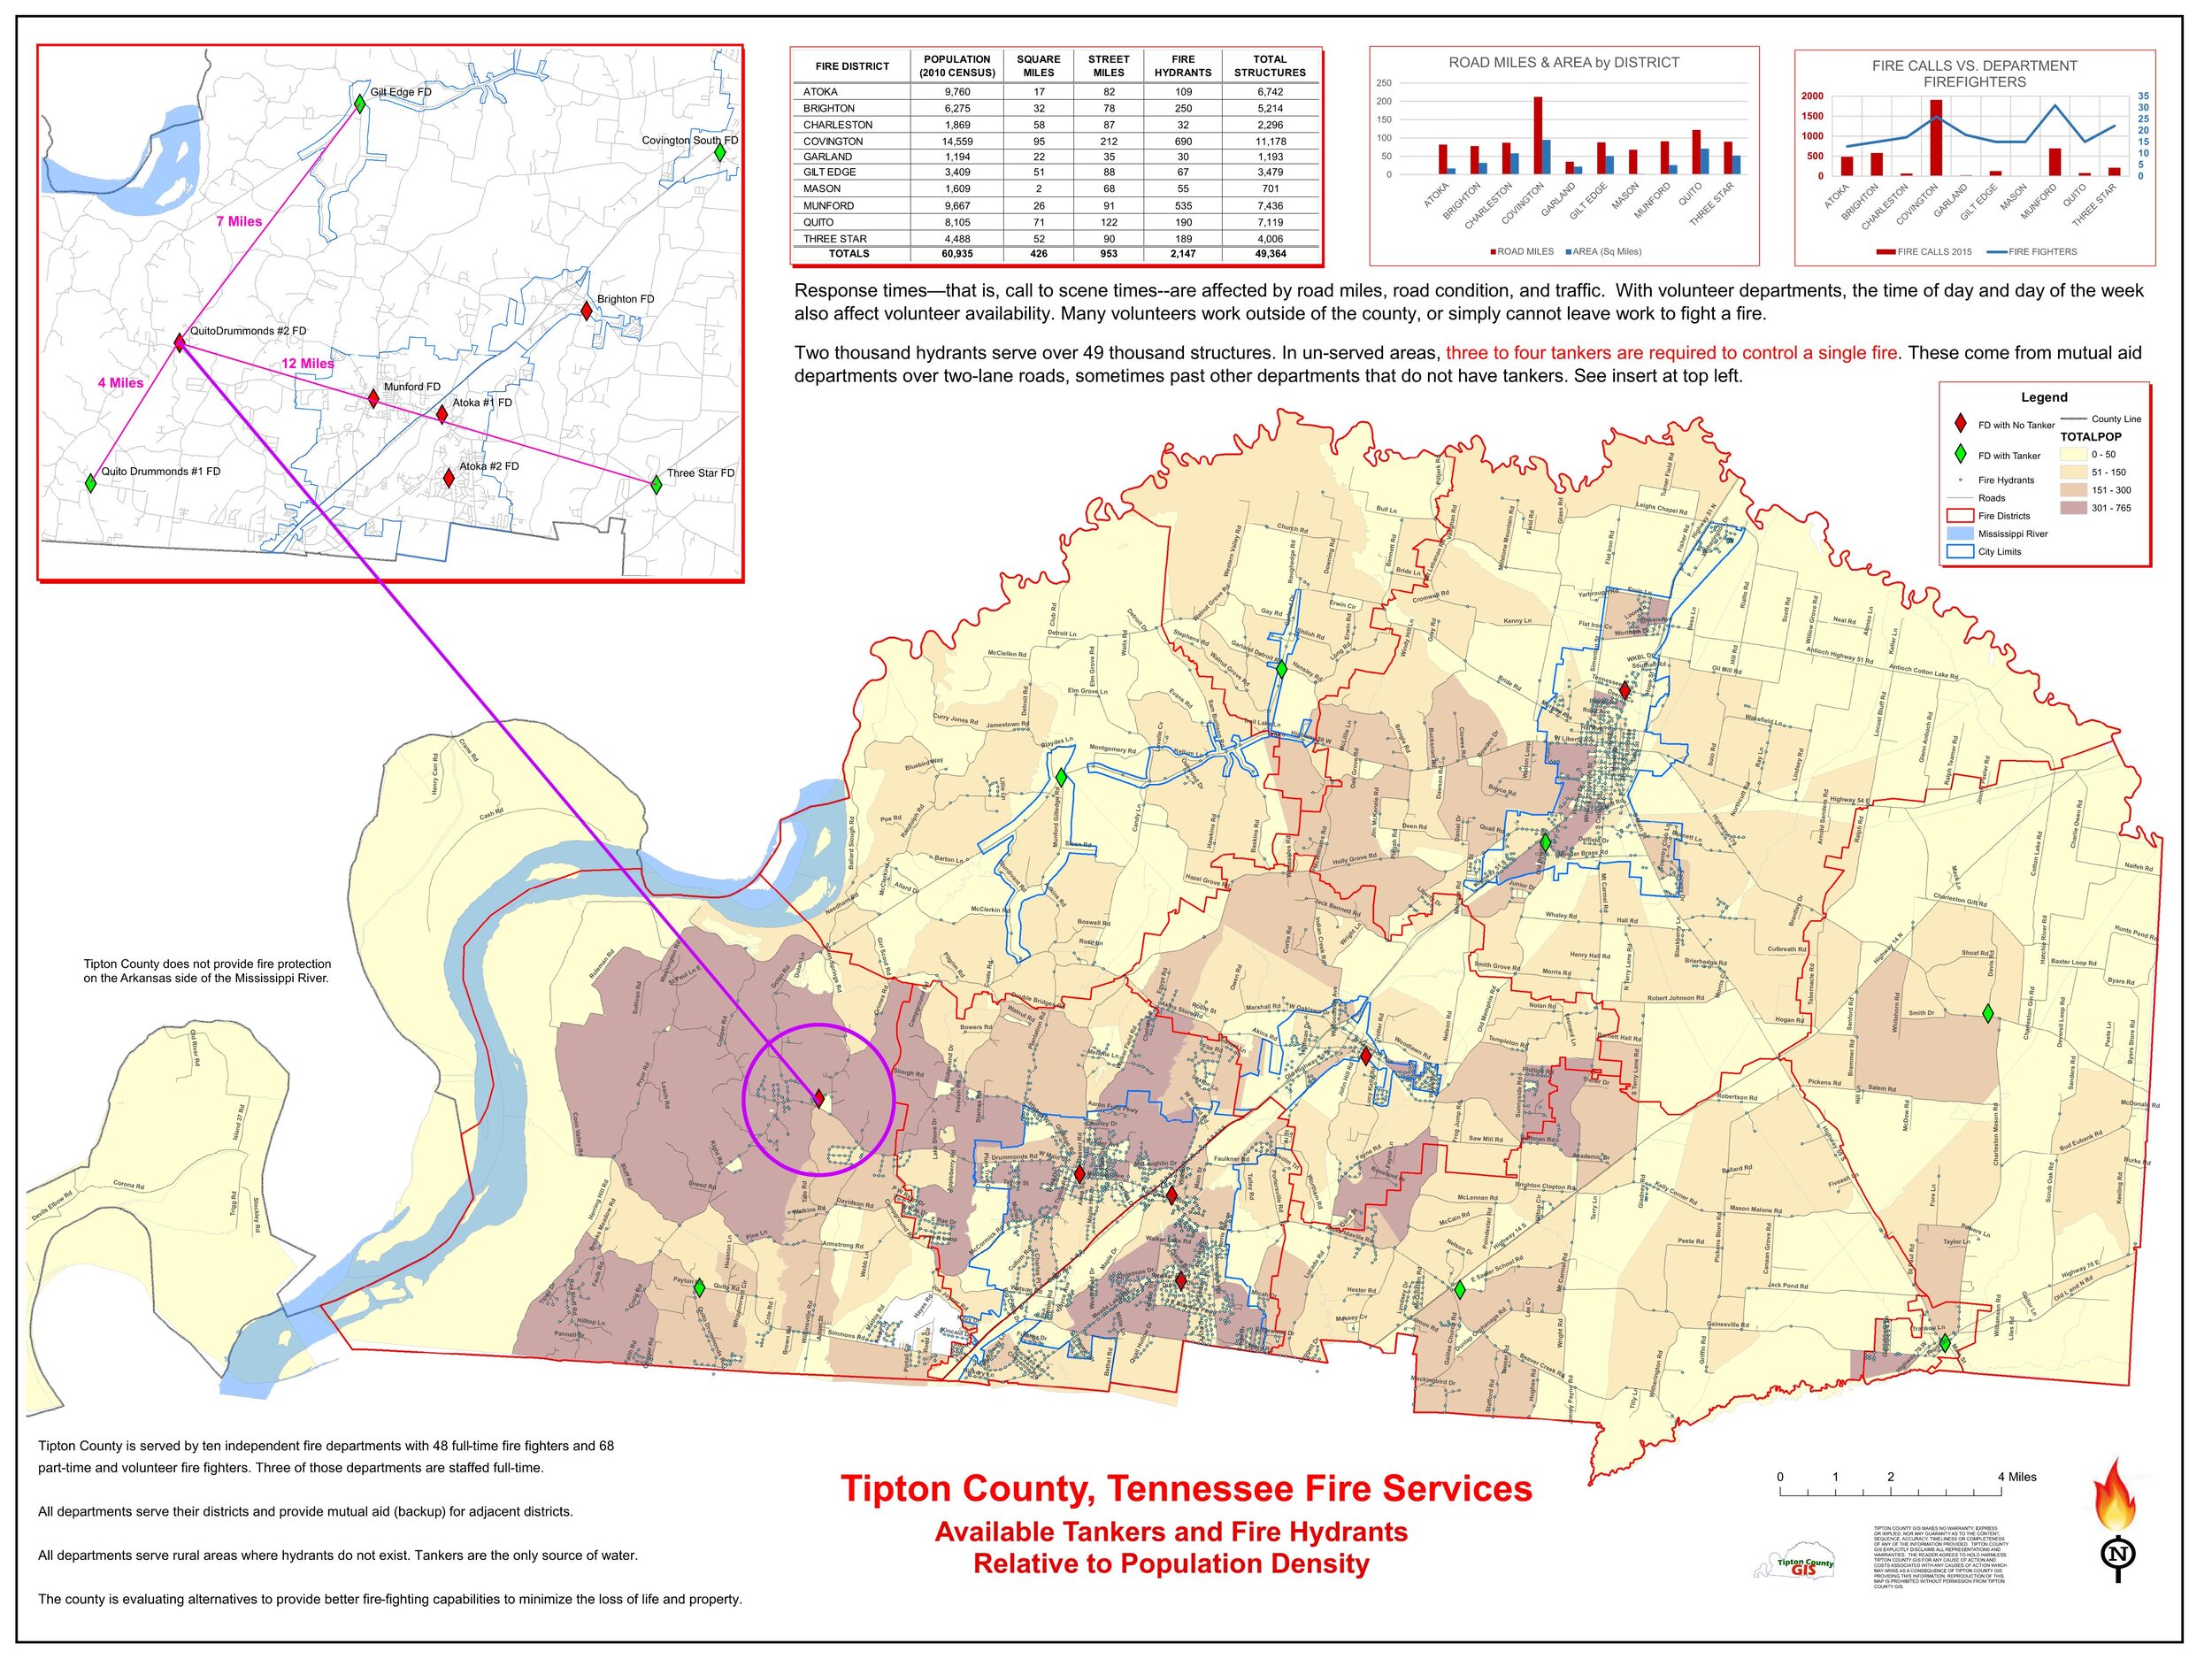 Available Tankers and Fire Hydrants Relative to Population Density